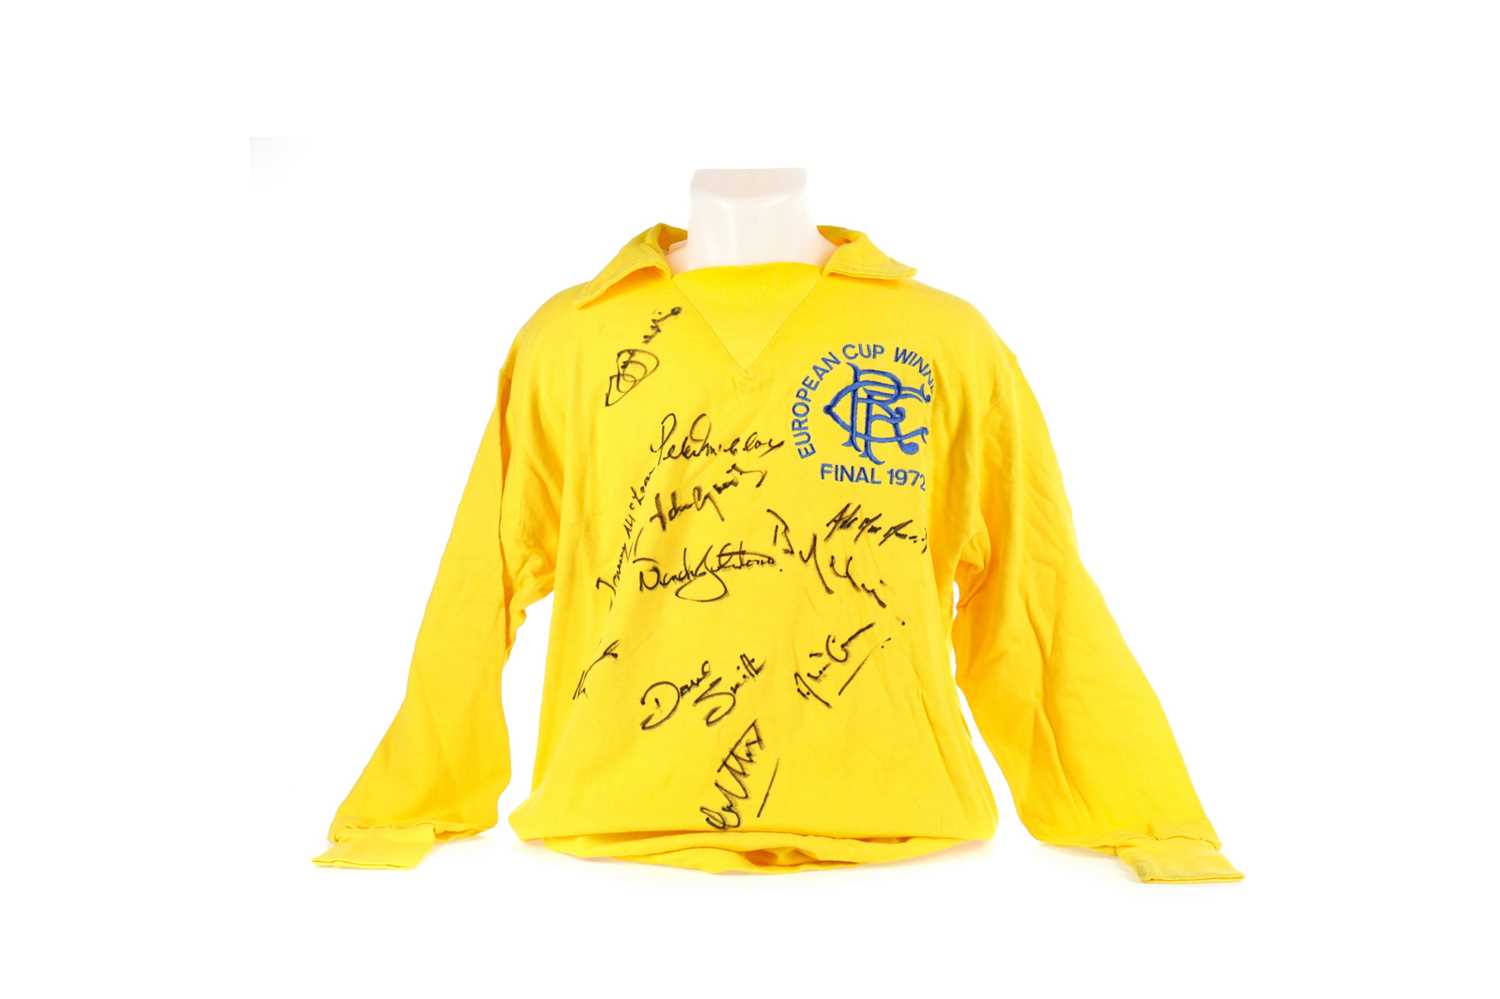 Lot 1716 - A RANGERS F.C. JERSEY SIGNED BY THE EUROPEAN CUP WINNERS CUP 1971/72 SIDE